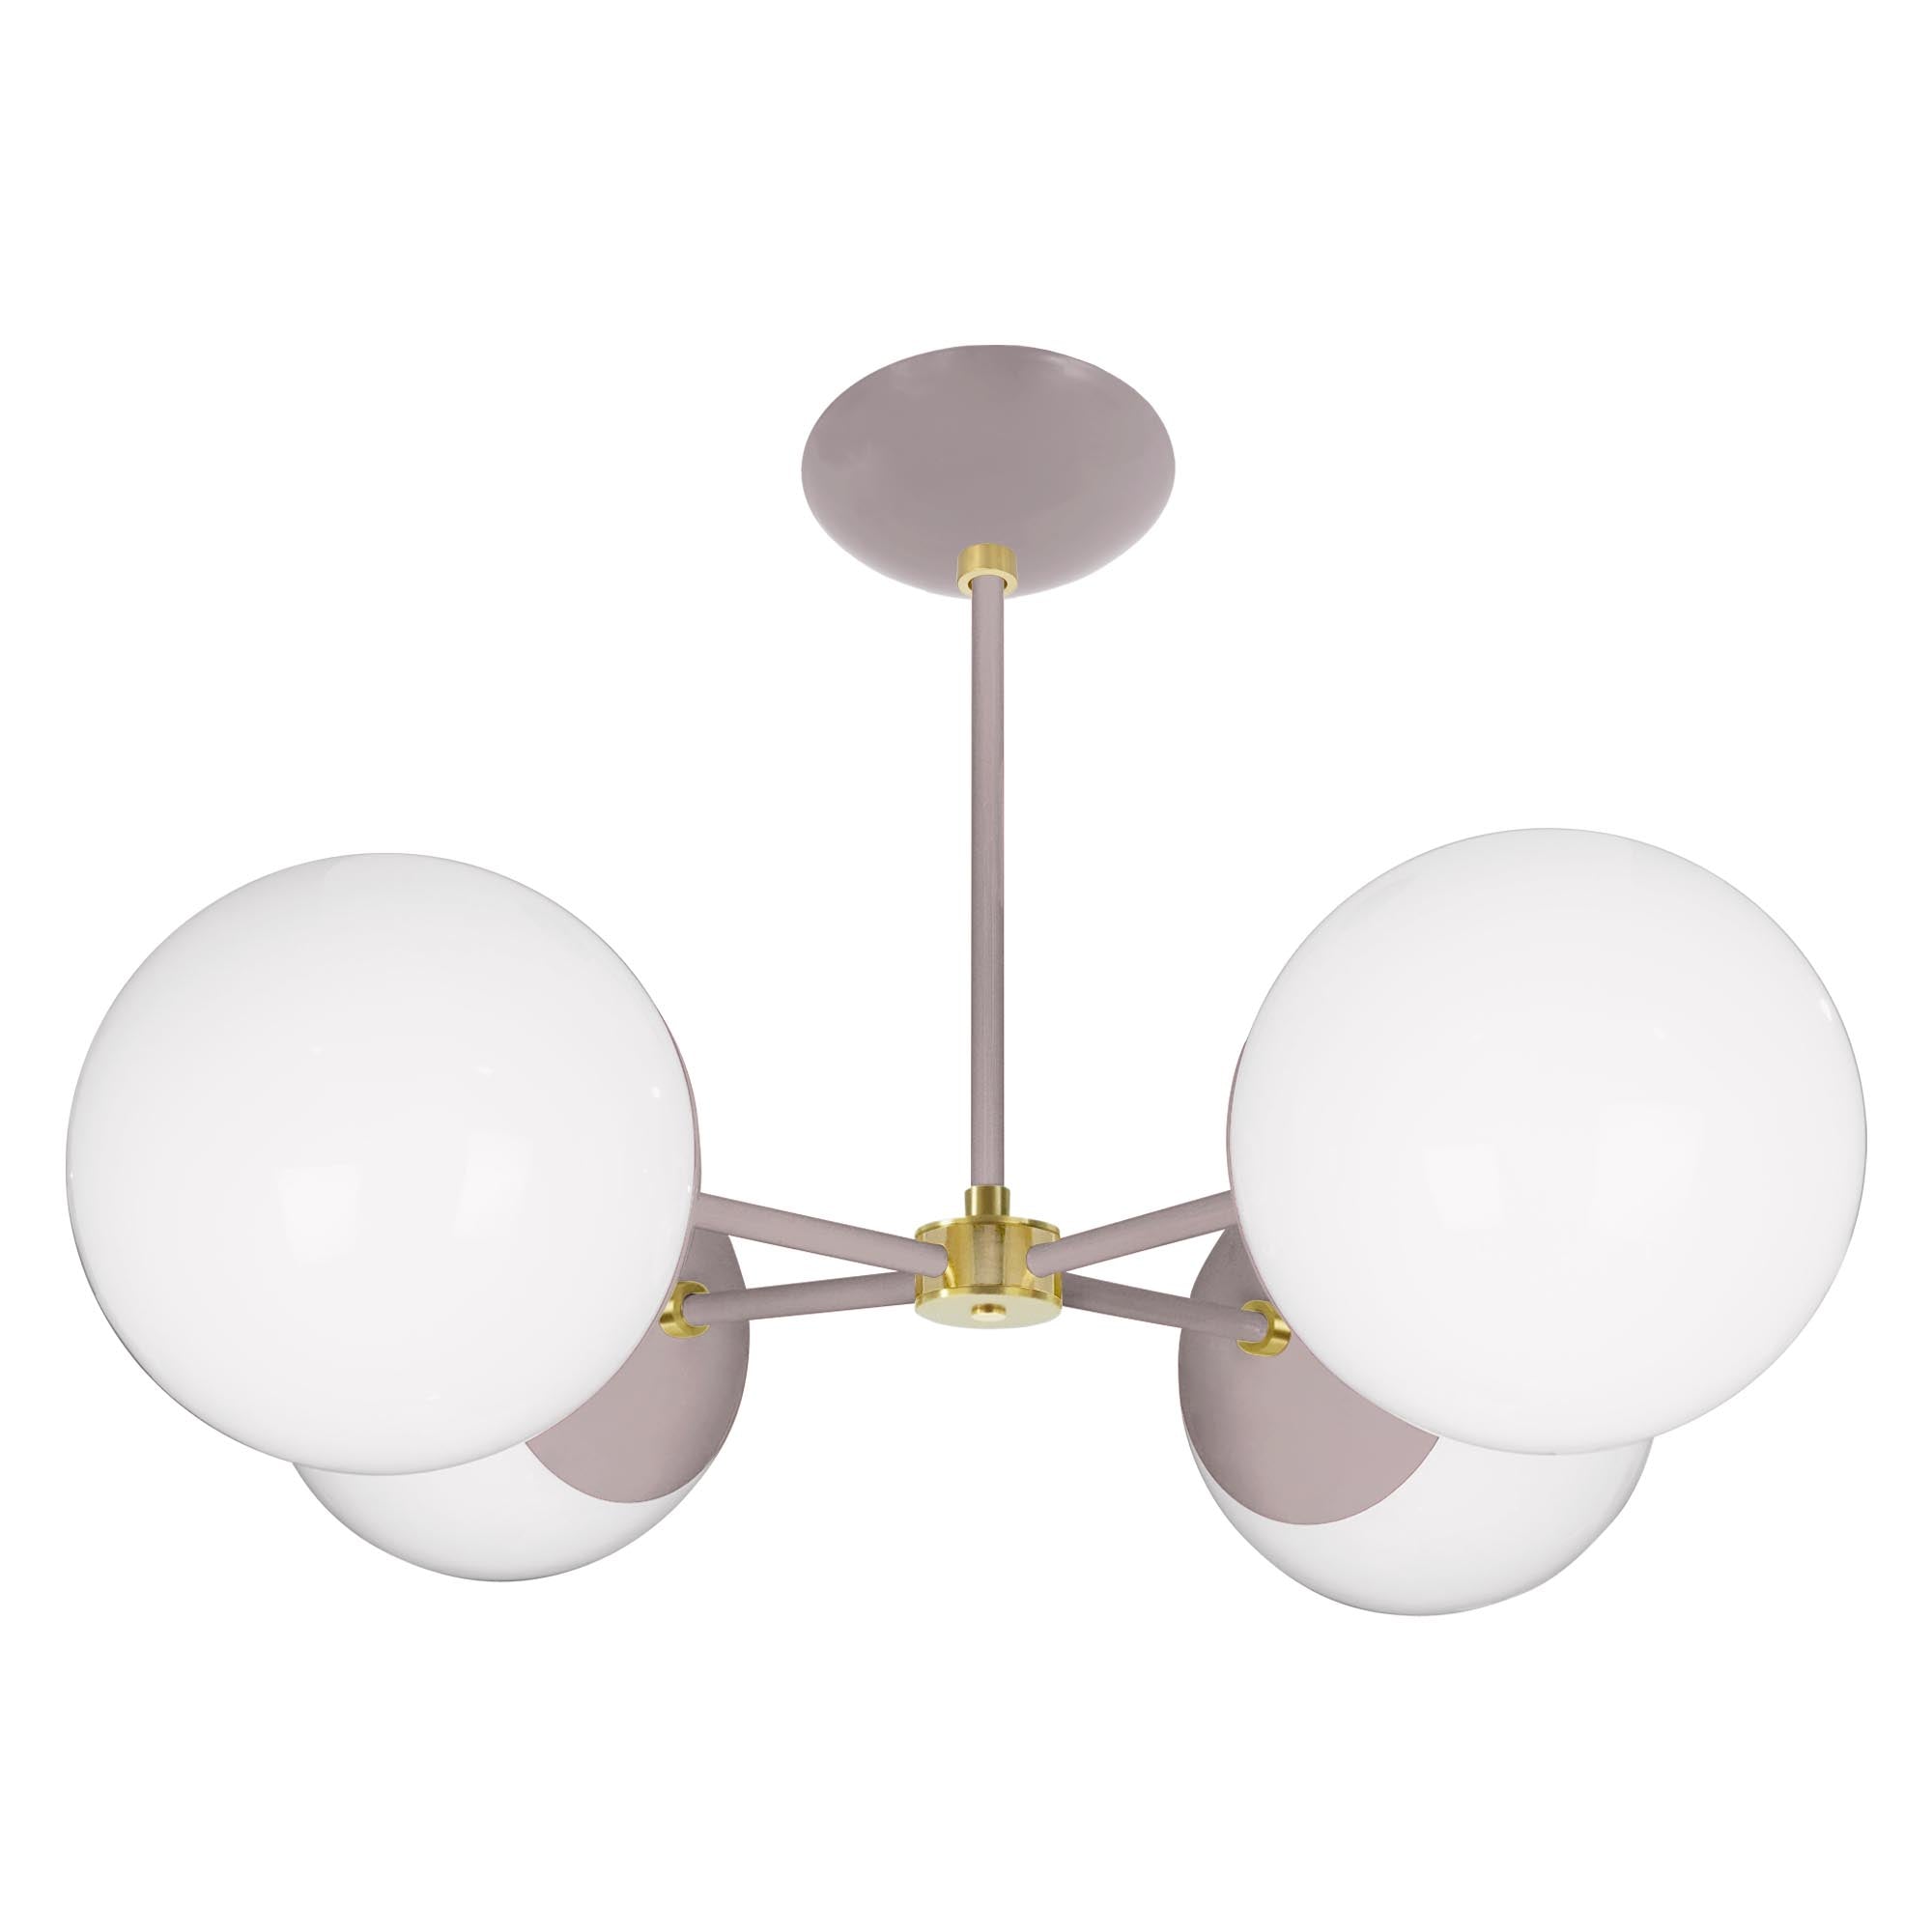 Brass and barely color Big Orbi chandelier Dutton Brown lighting